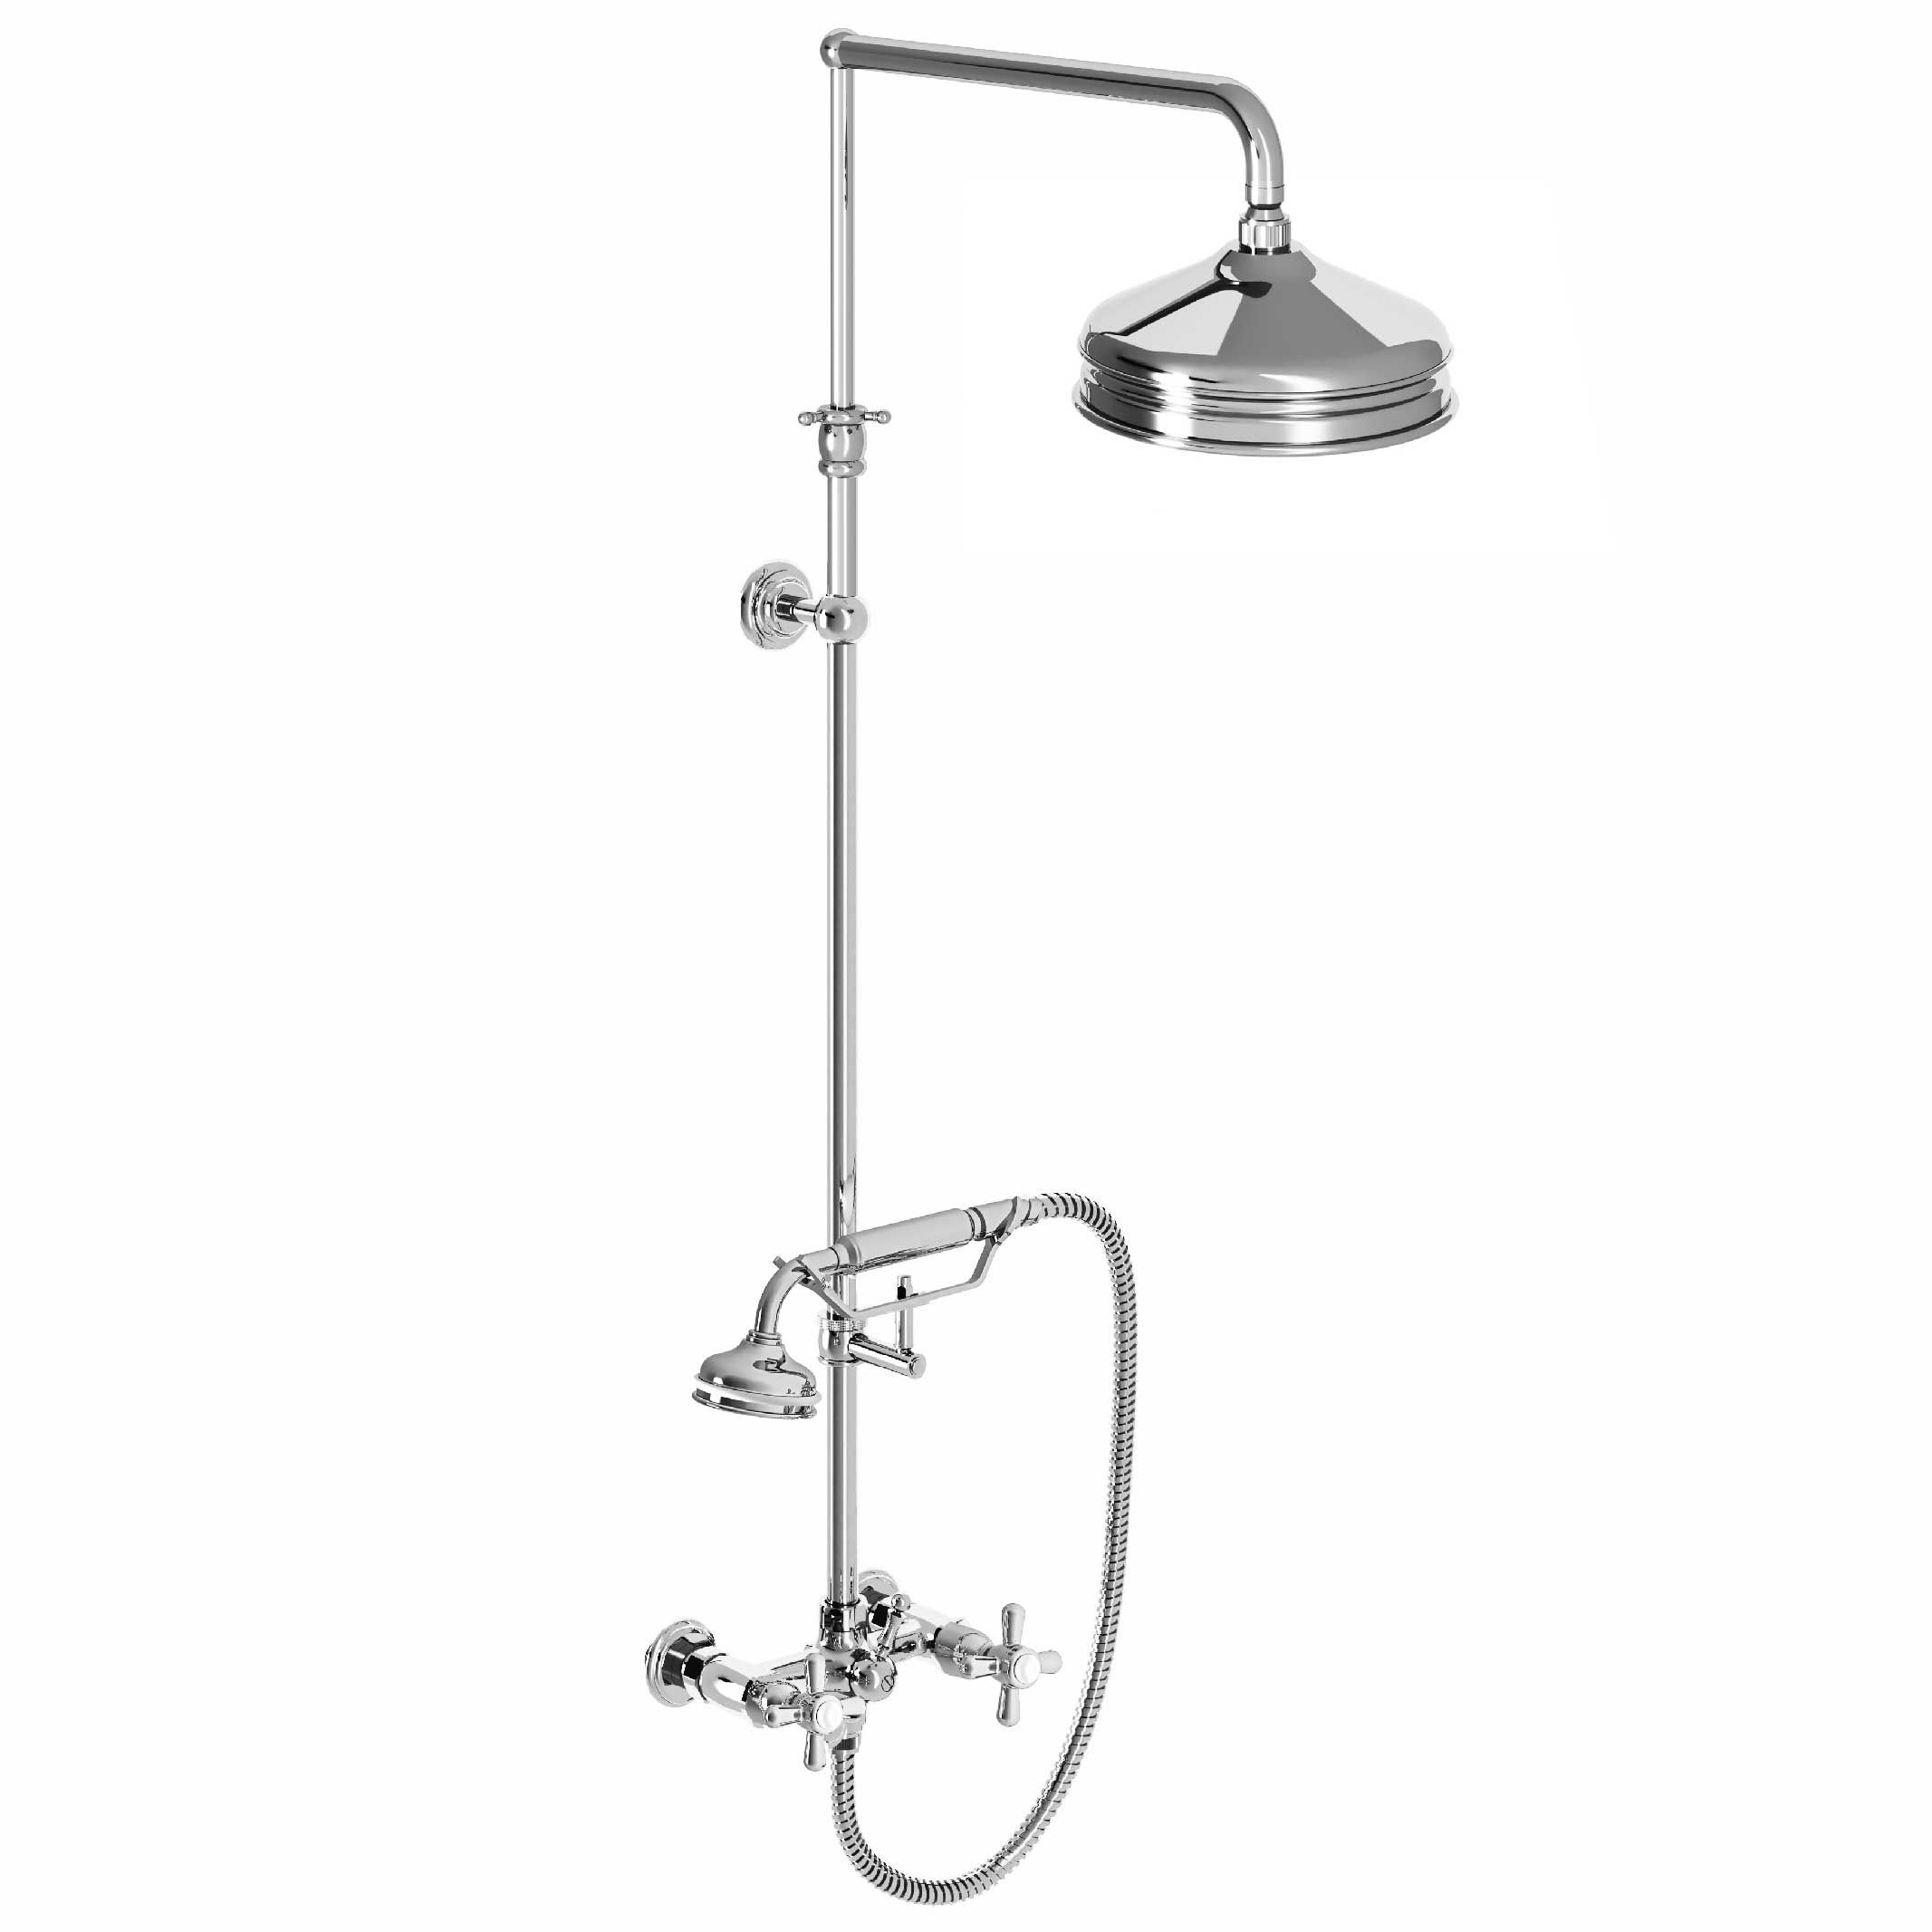 M40-2204 Shower mixer with column, anti-scaling